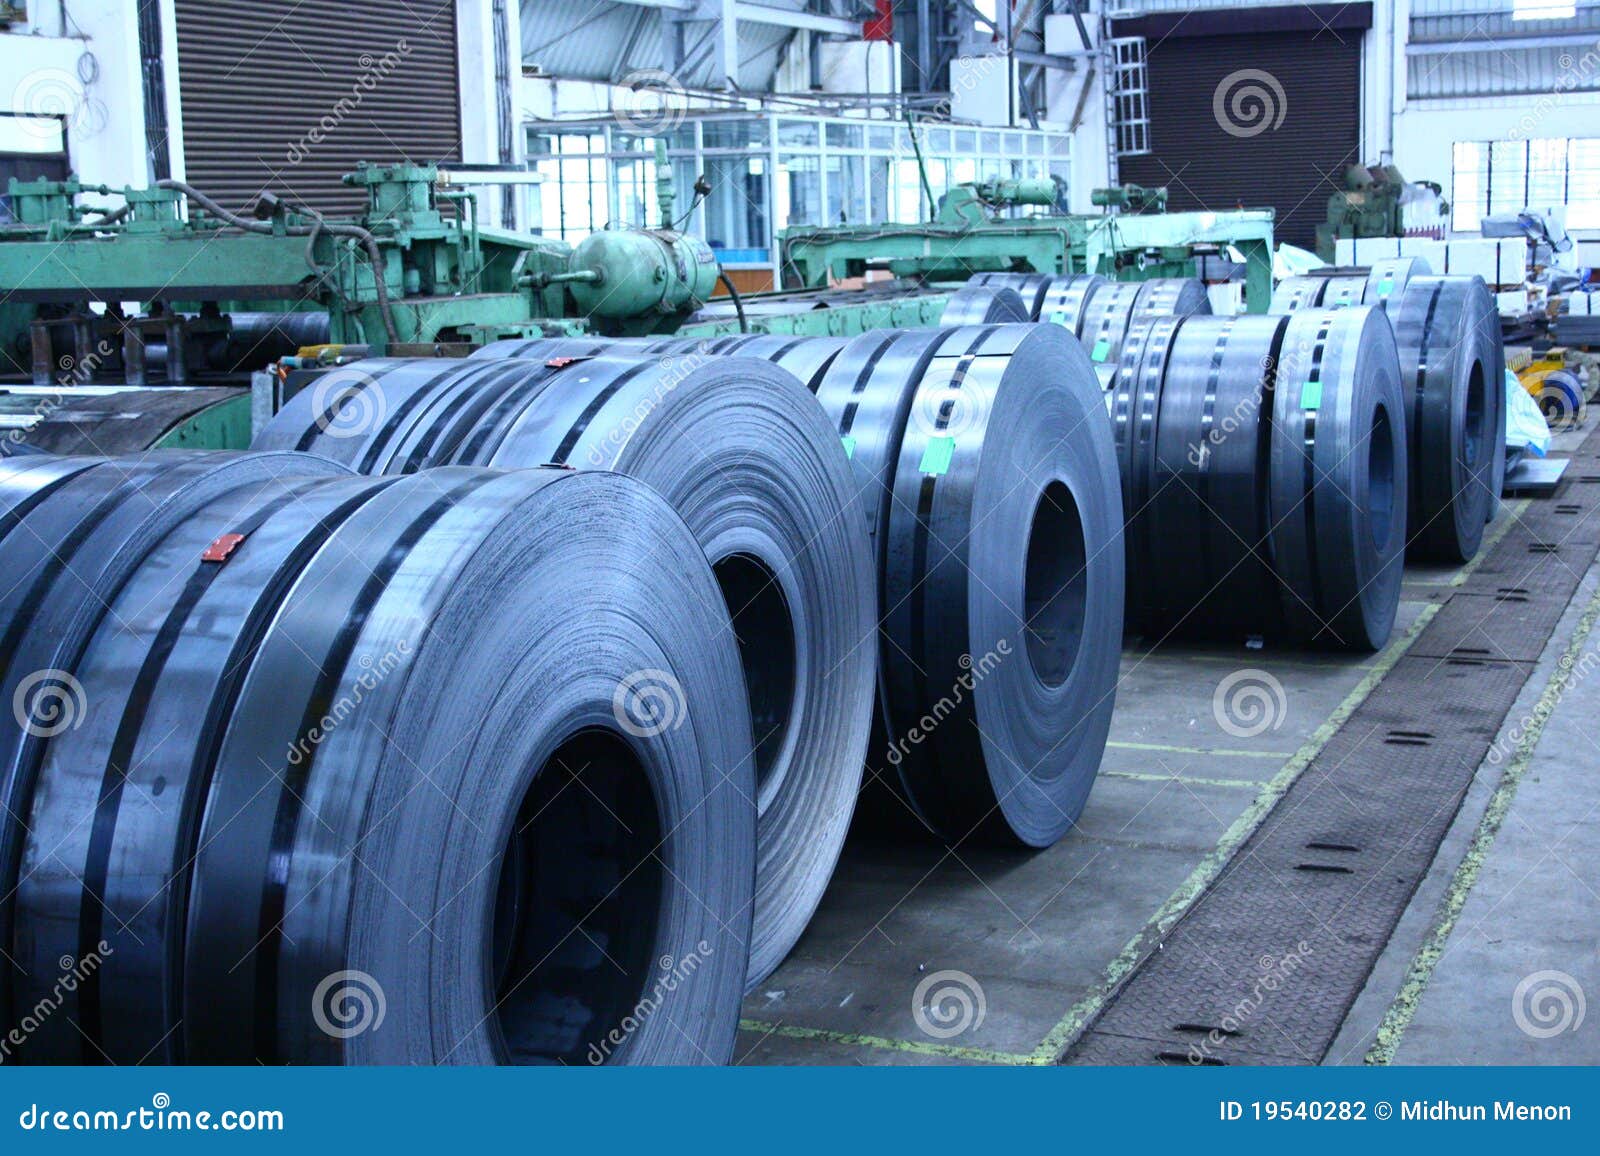 slitted coils stored for manufacturing